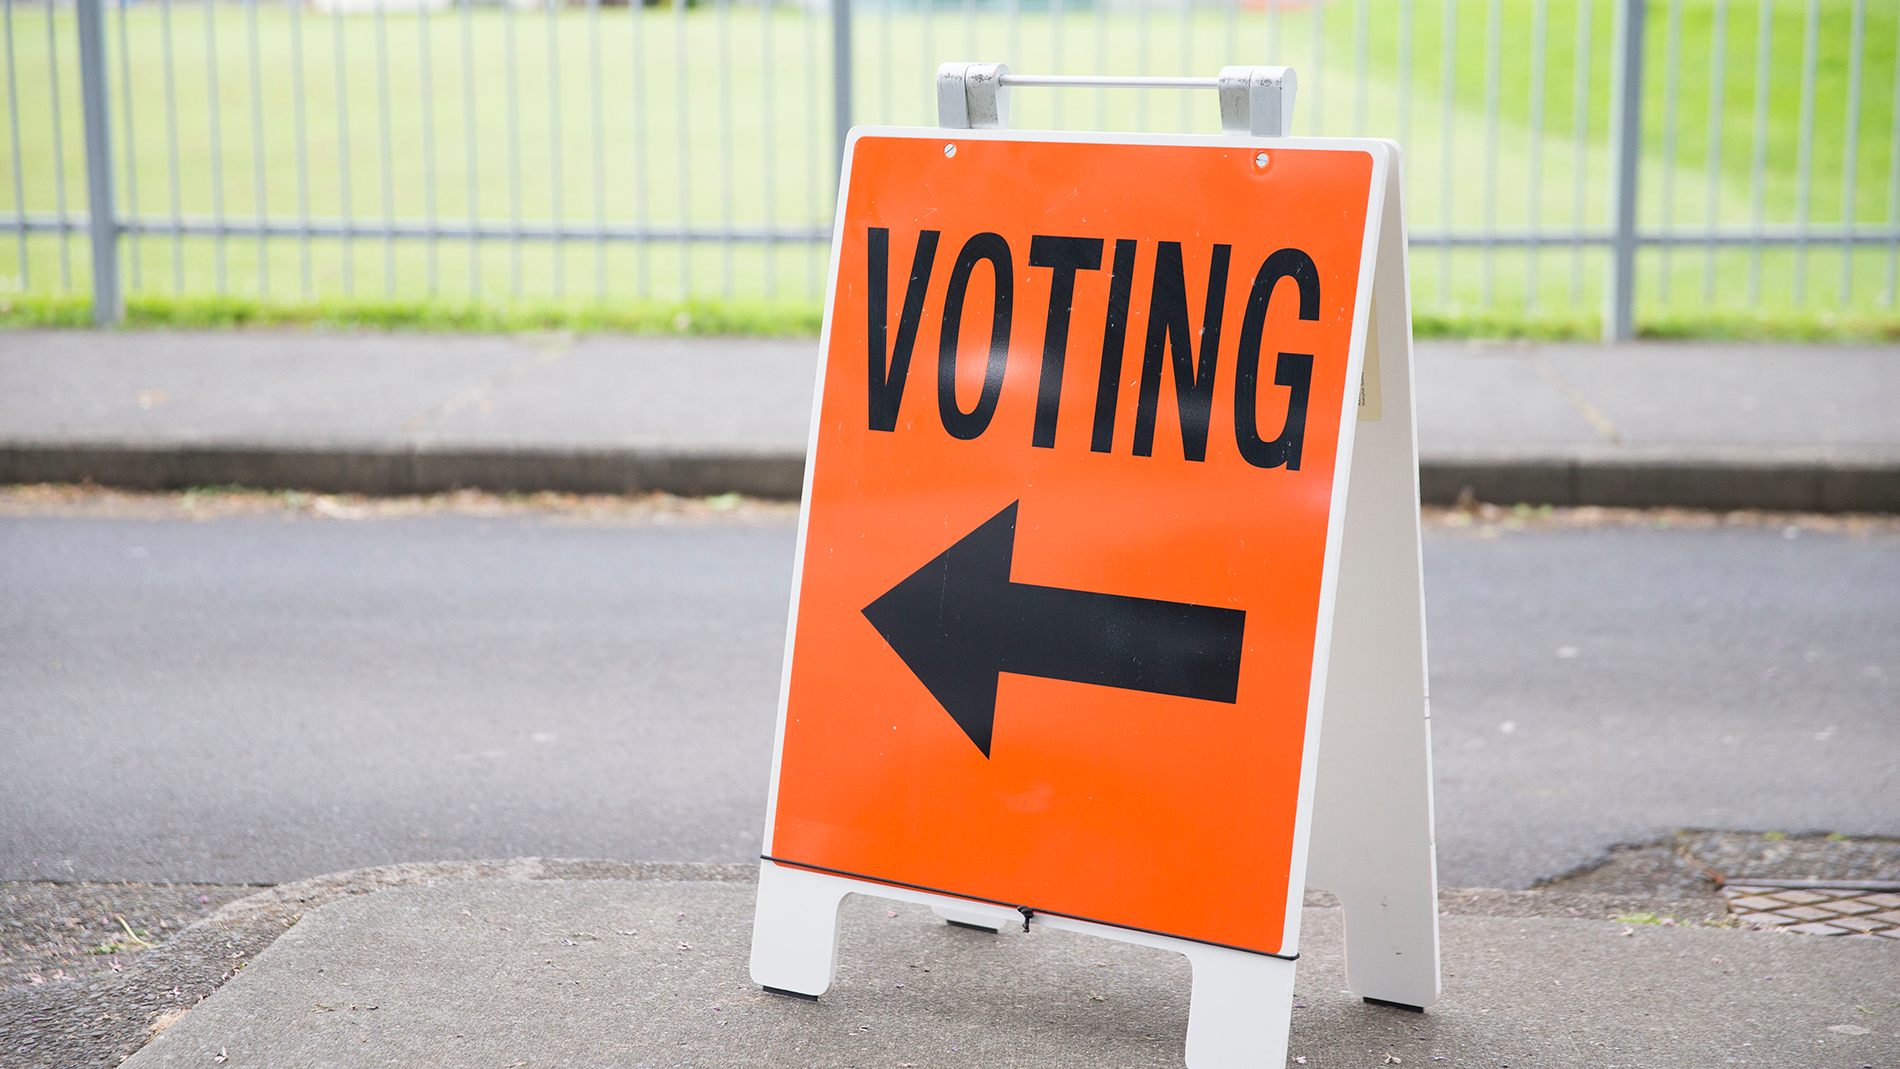 Photo of voting sign - credit: Electoral Commission